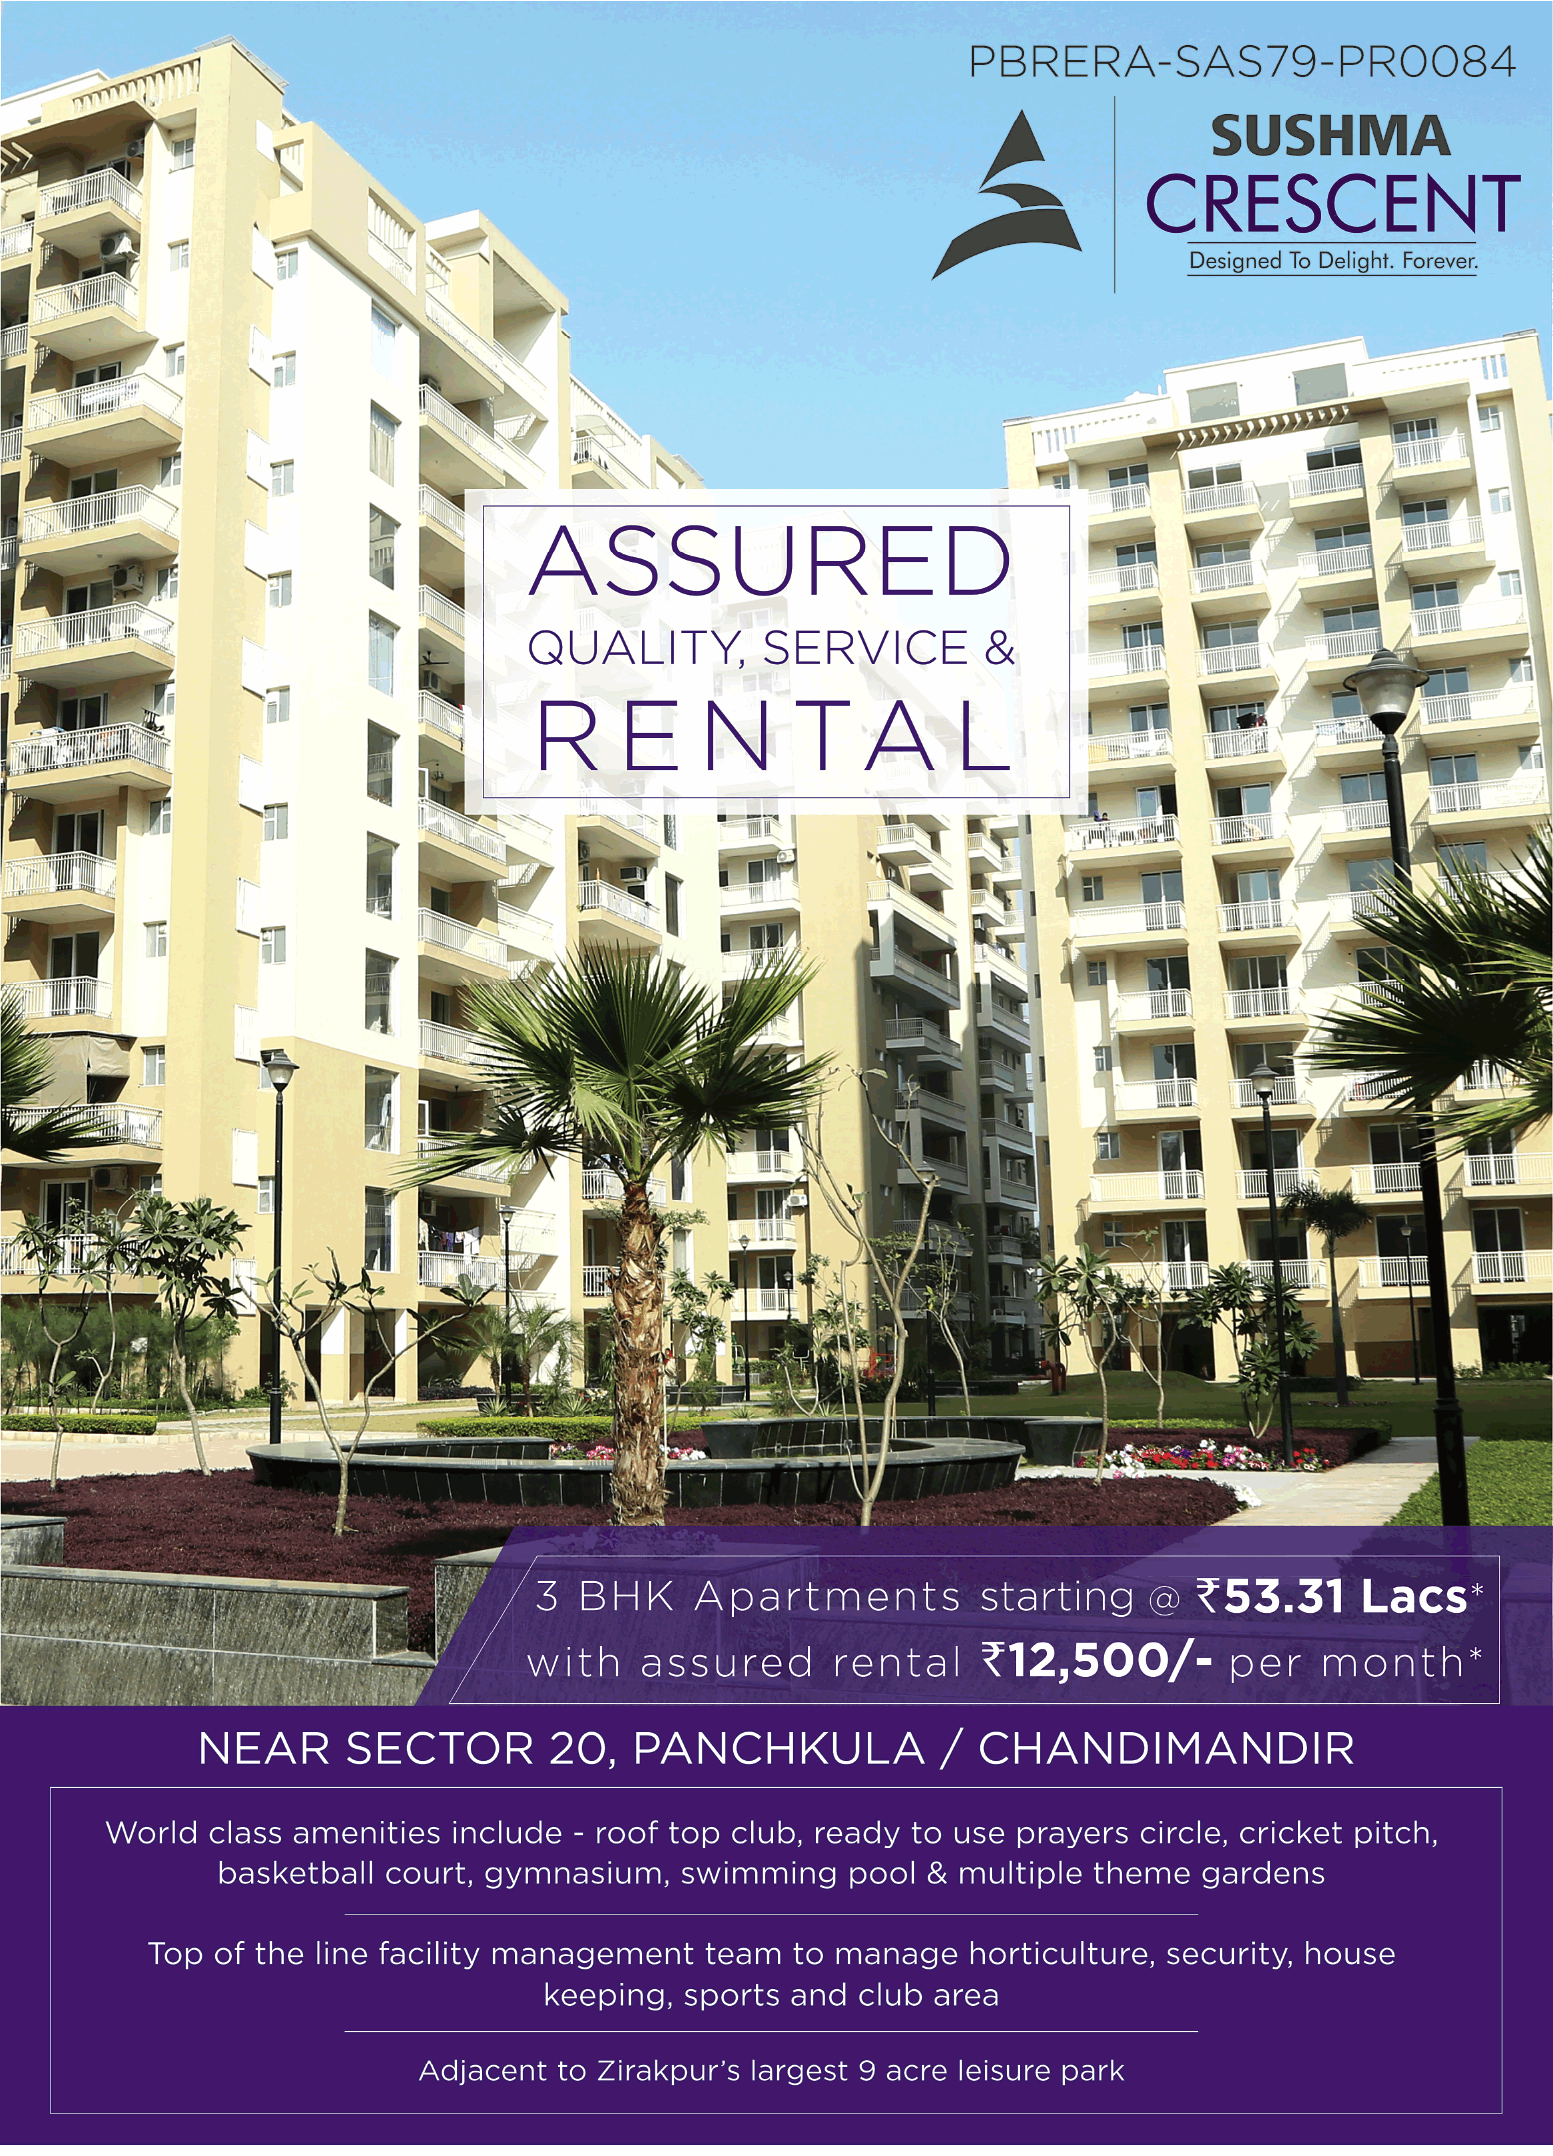 Book 3 bhk apartment at Rs 53.31 lakhs with assured rental Rs. 12500 pm at Sushma Crescent in Chandigarh Update